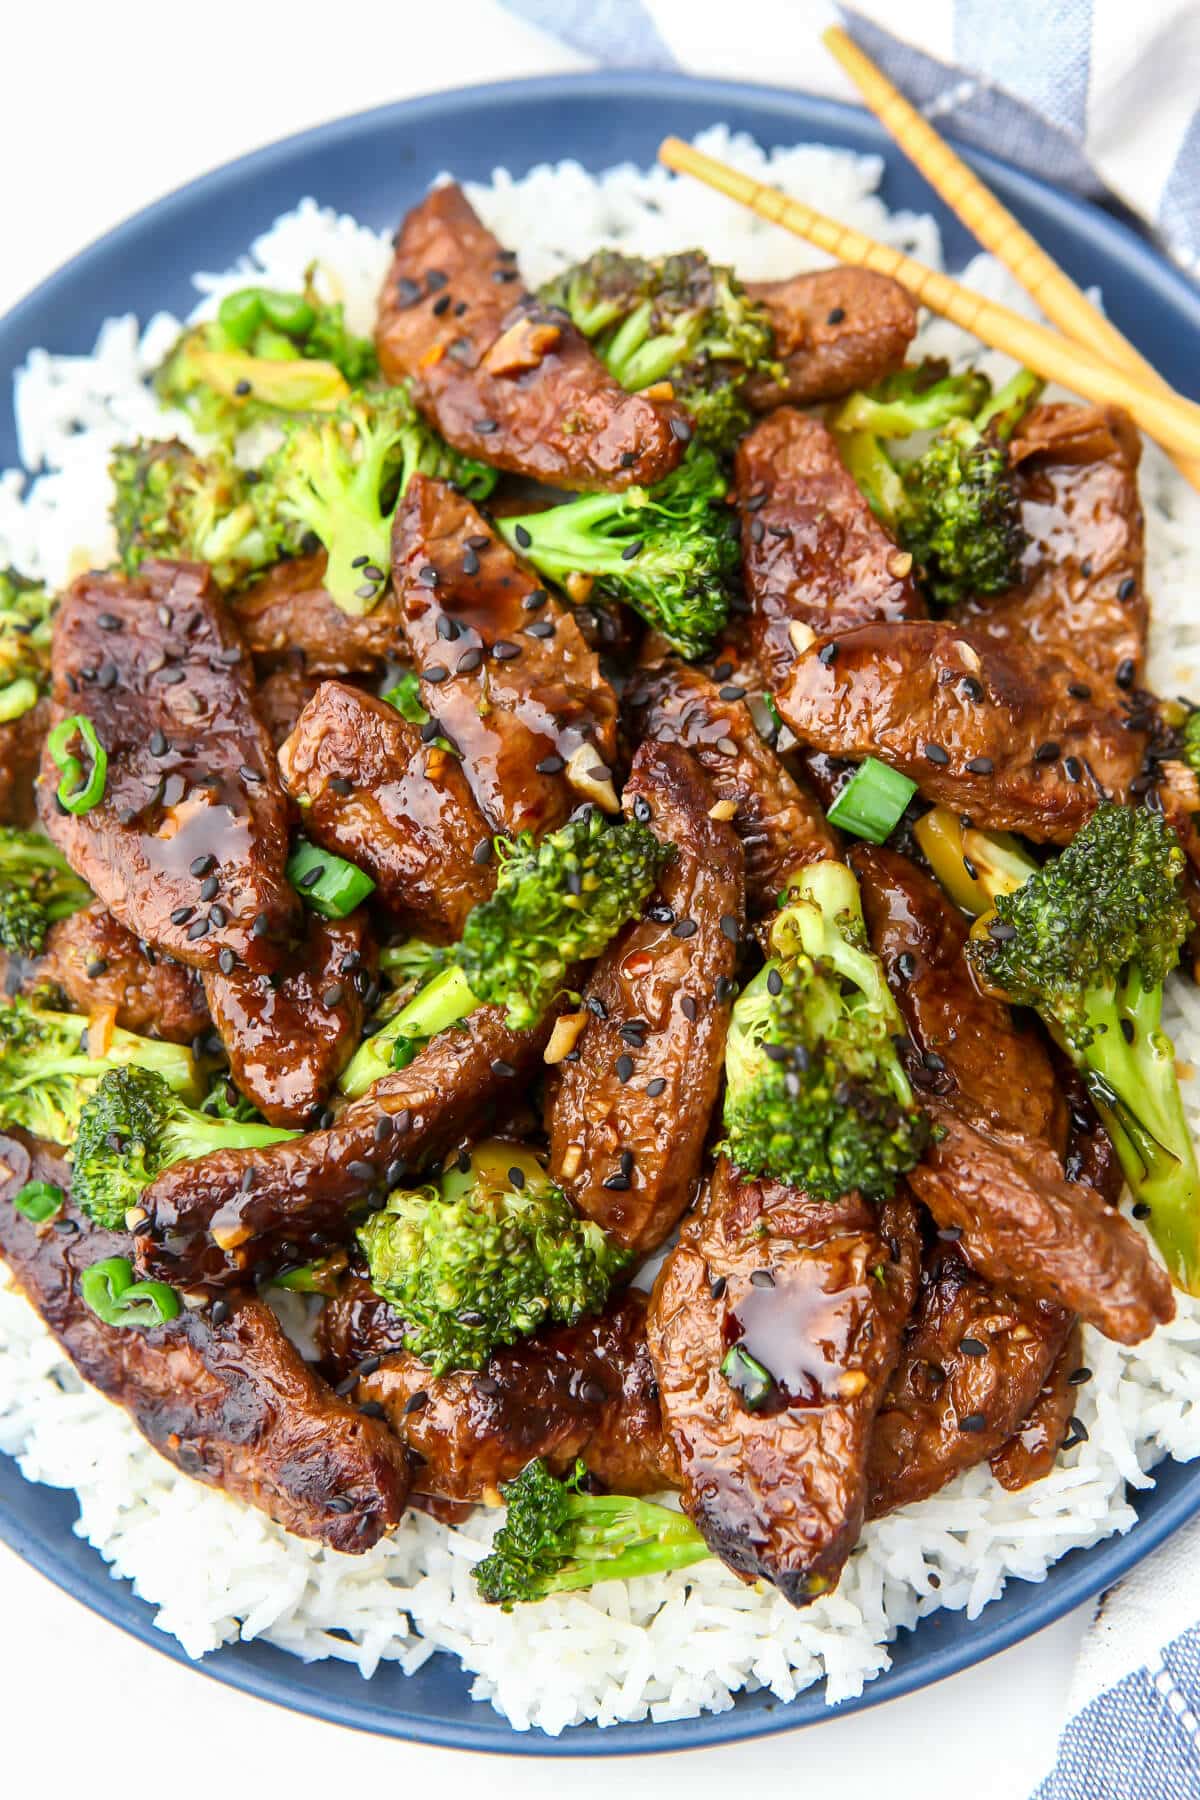 Vegan beef and broccoli served on a blue plate.